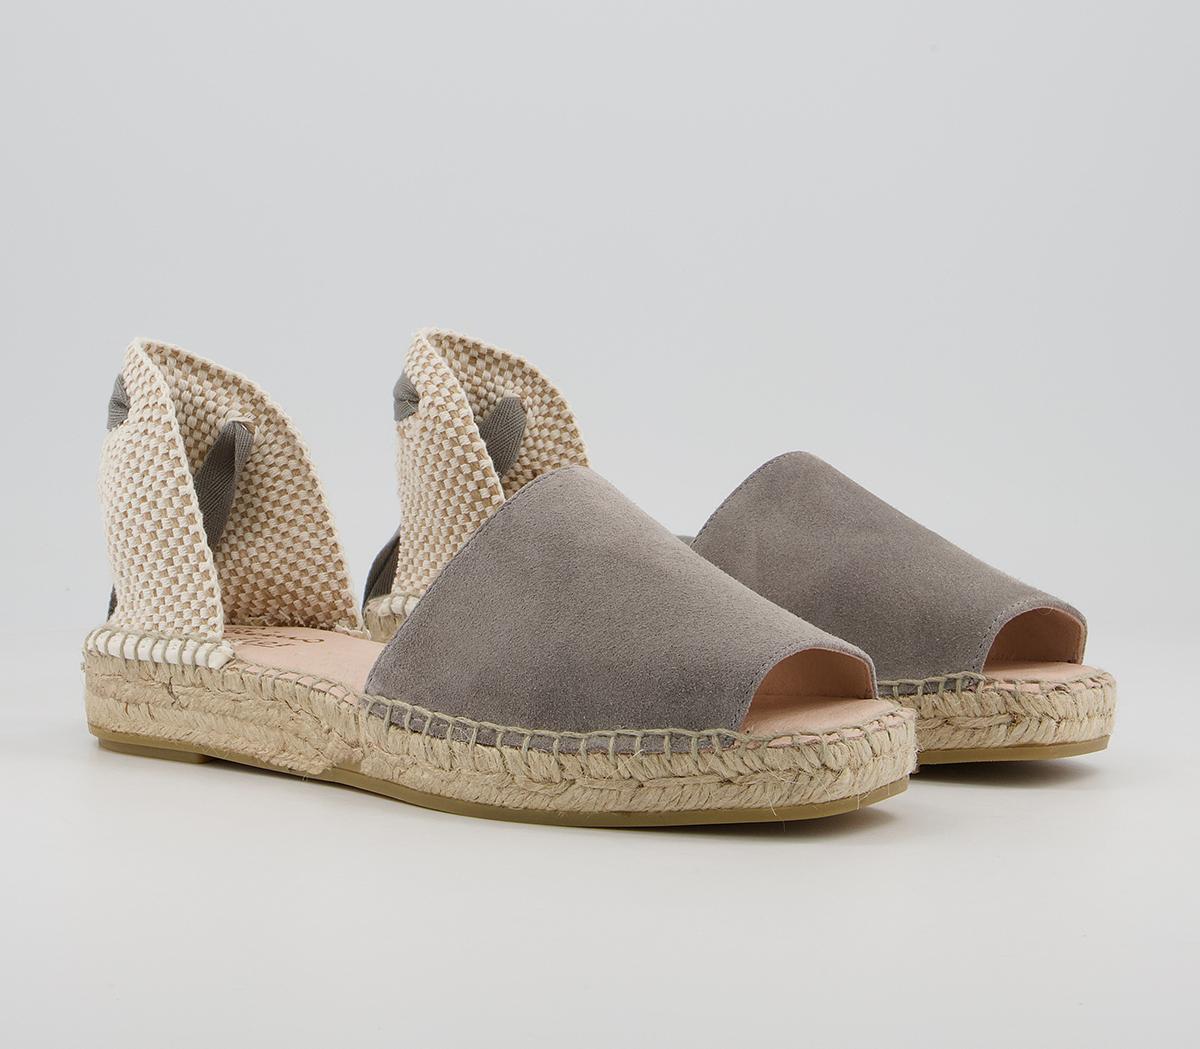 Gaimo for OFFICE Verbena Ankle Tie Espadrilles Grey Suede - Flat Shoes ...